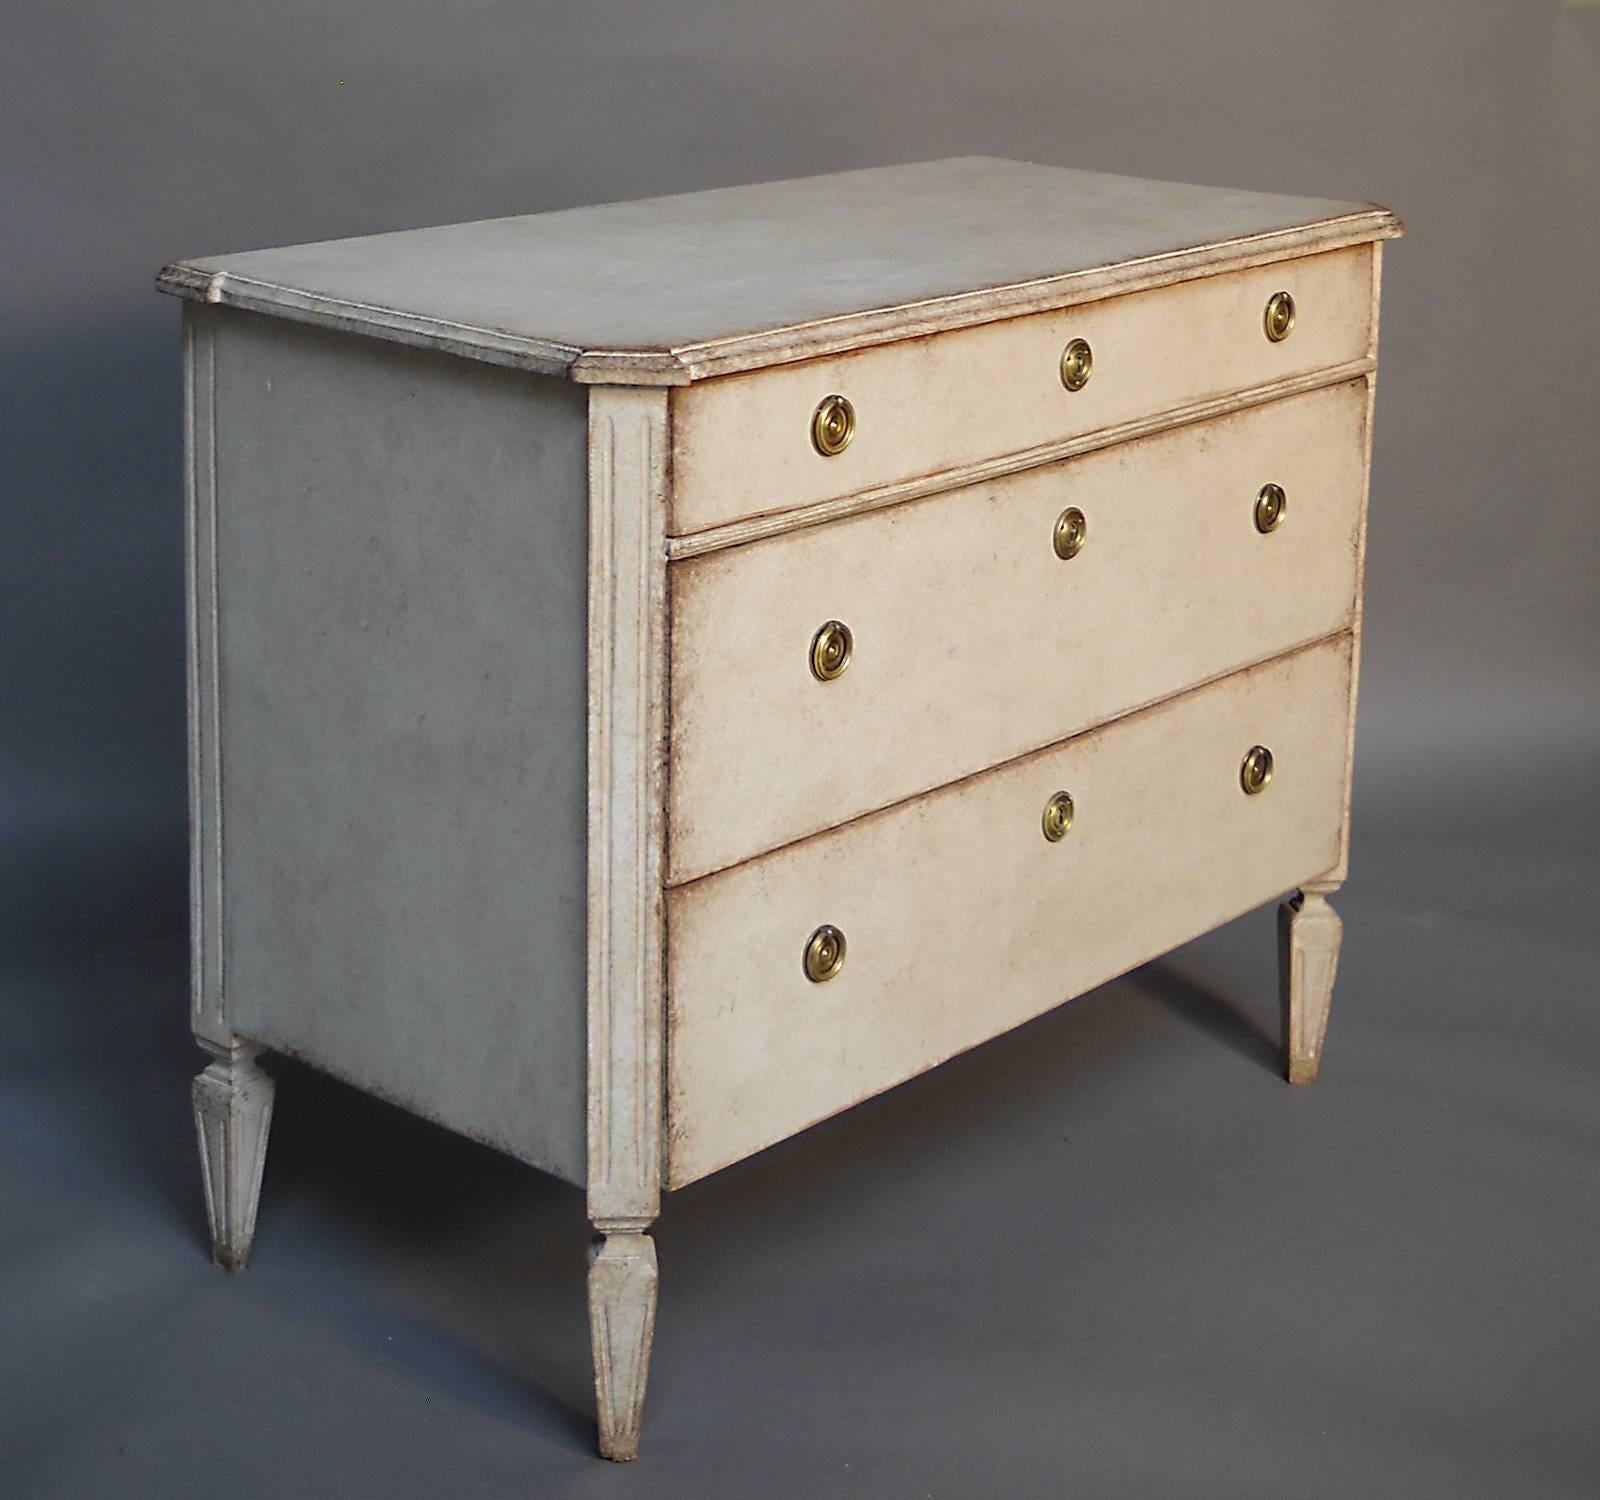 Chest of drawers in the Gustavian style, Sweden, circa 1880. Shaped top, canted corners and tapering legs. Brass hardware.